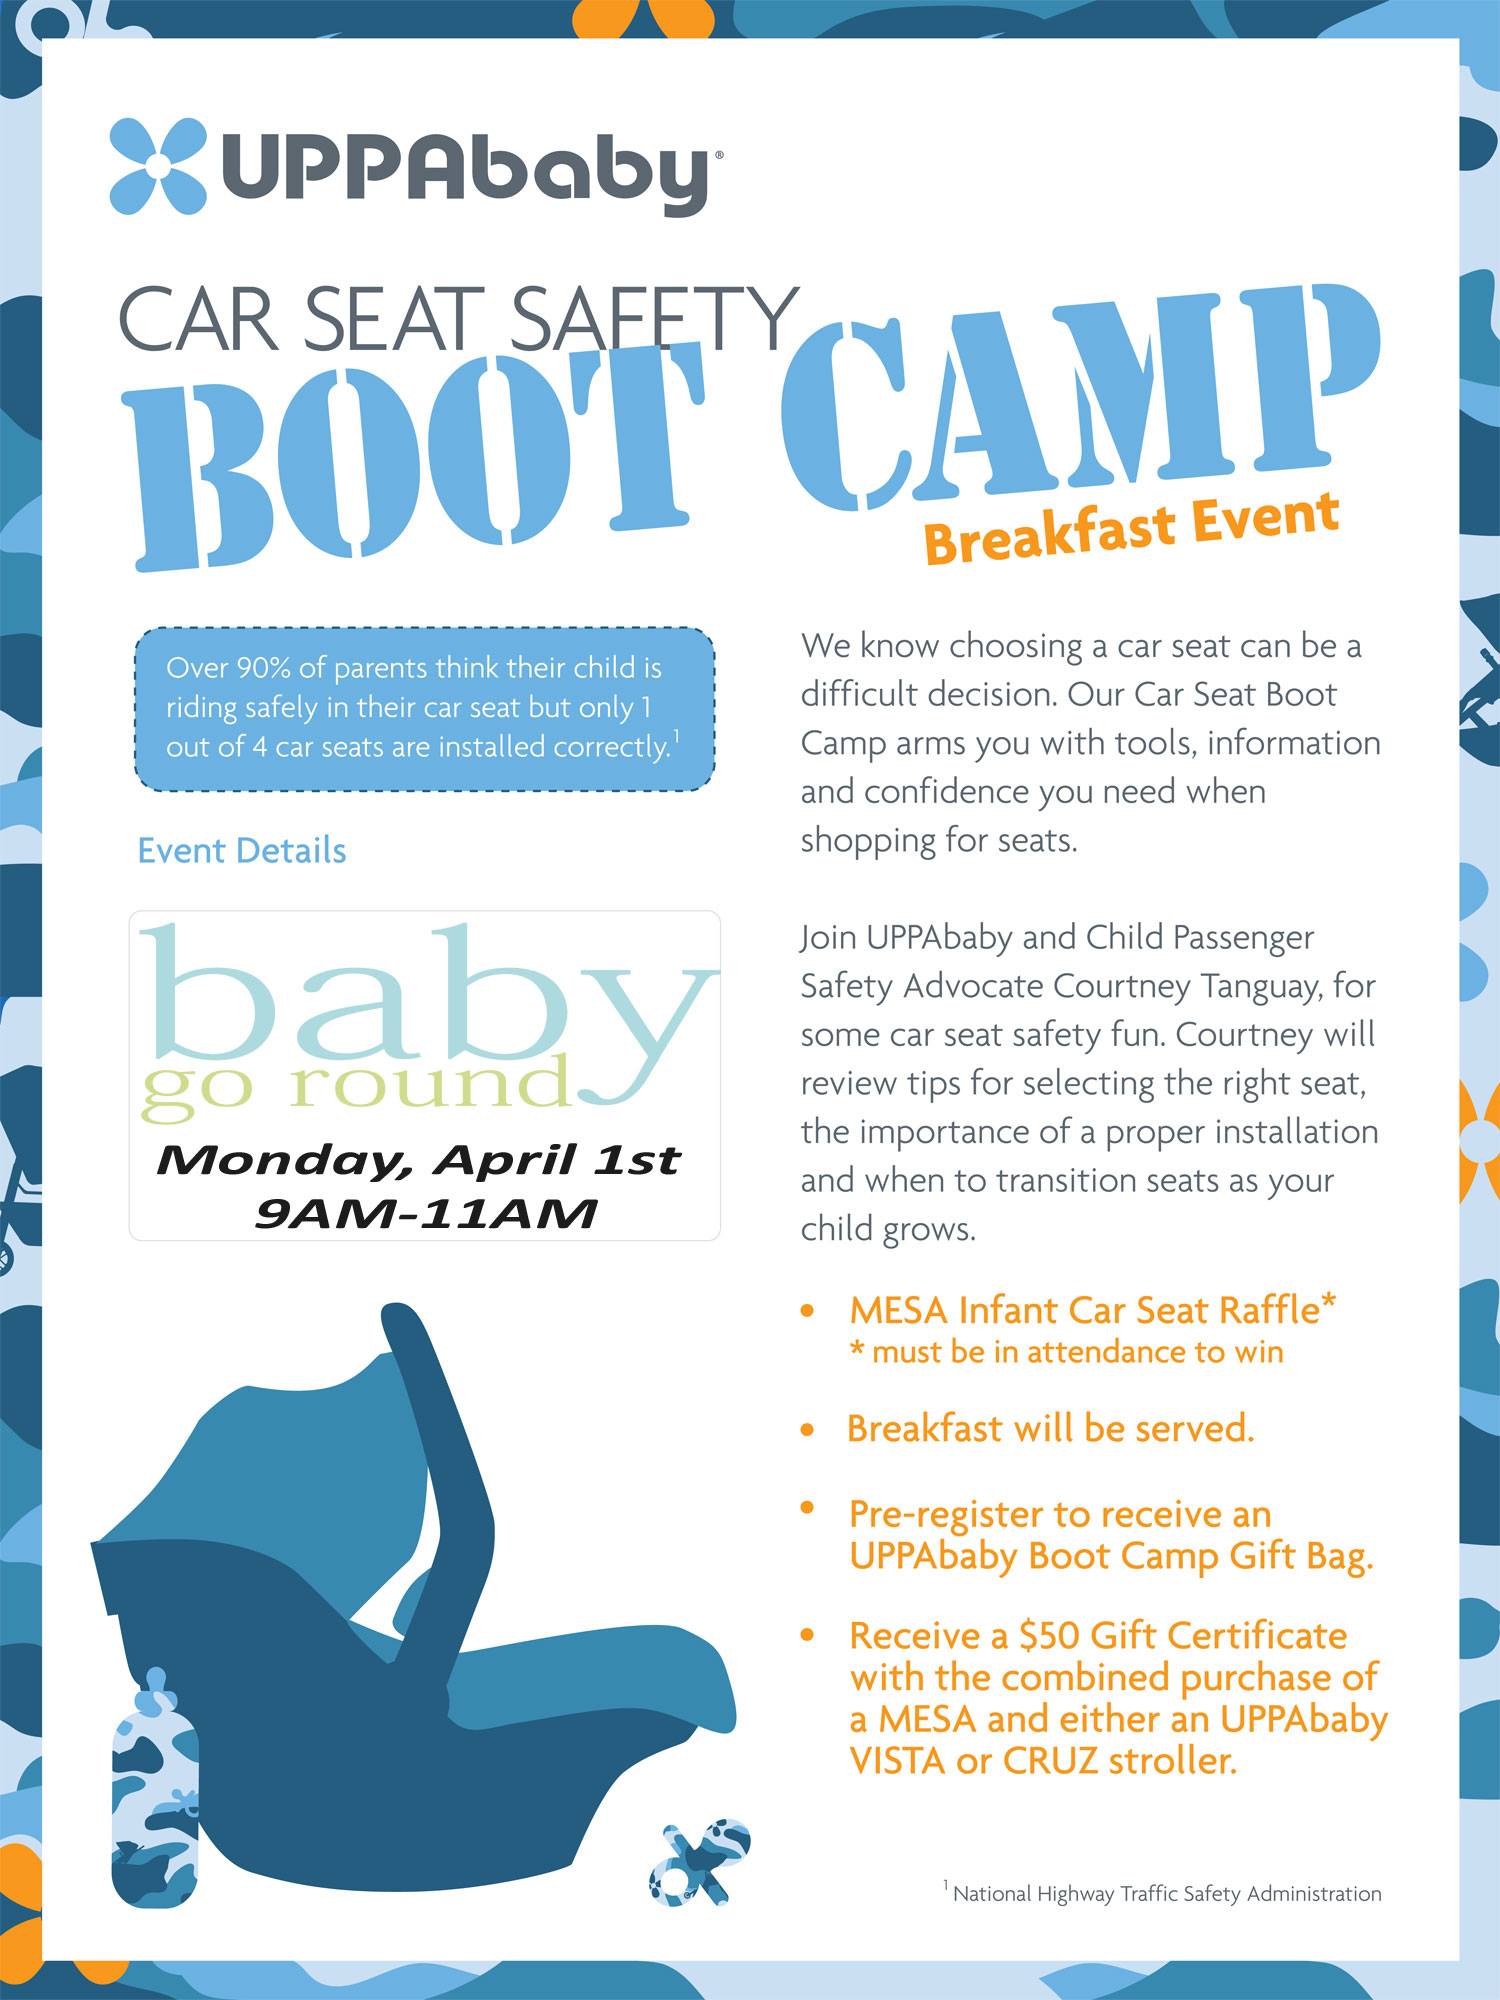 UPPAbaby Car Seat Bootcamp at Baby Go Round Monday April 1st!  Meet the Mesa and a Car Seat Safety Expert, win a Mesa, free gift bag to those who pre-register.  Breakfast will be served.